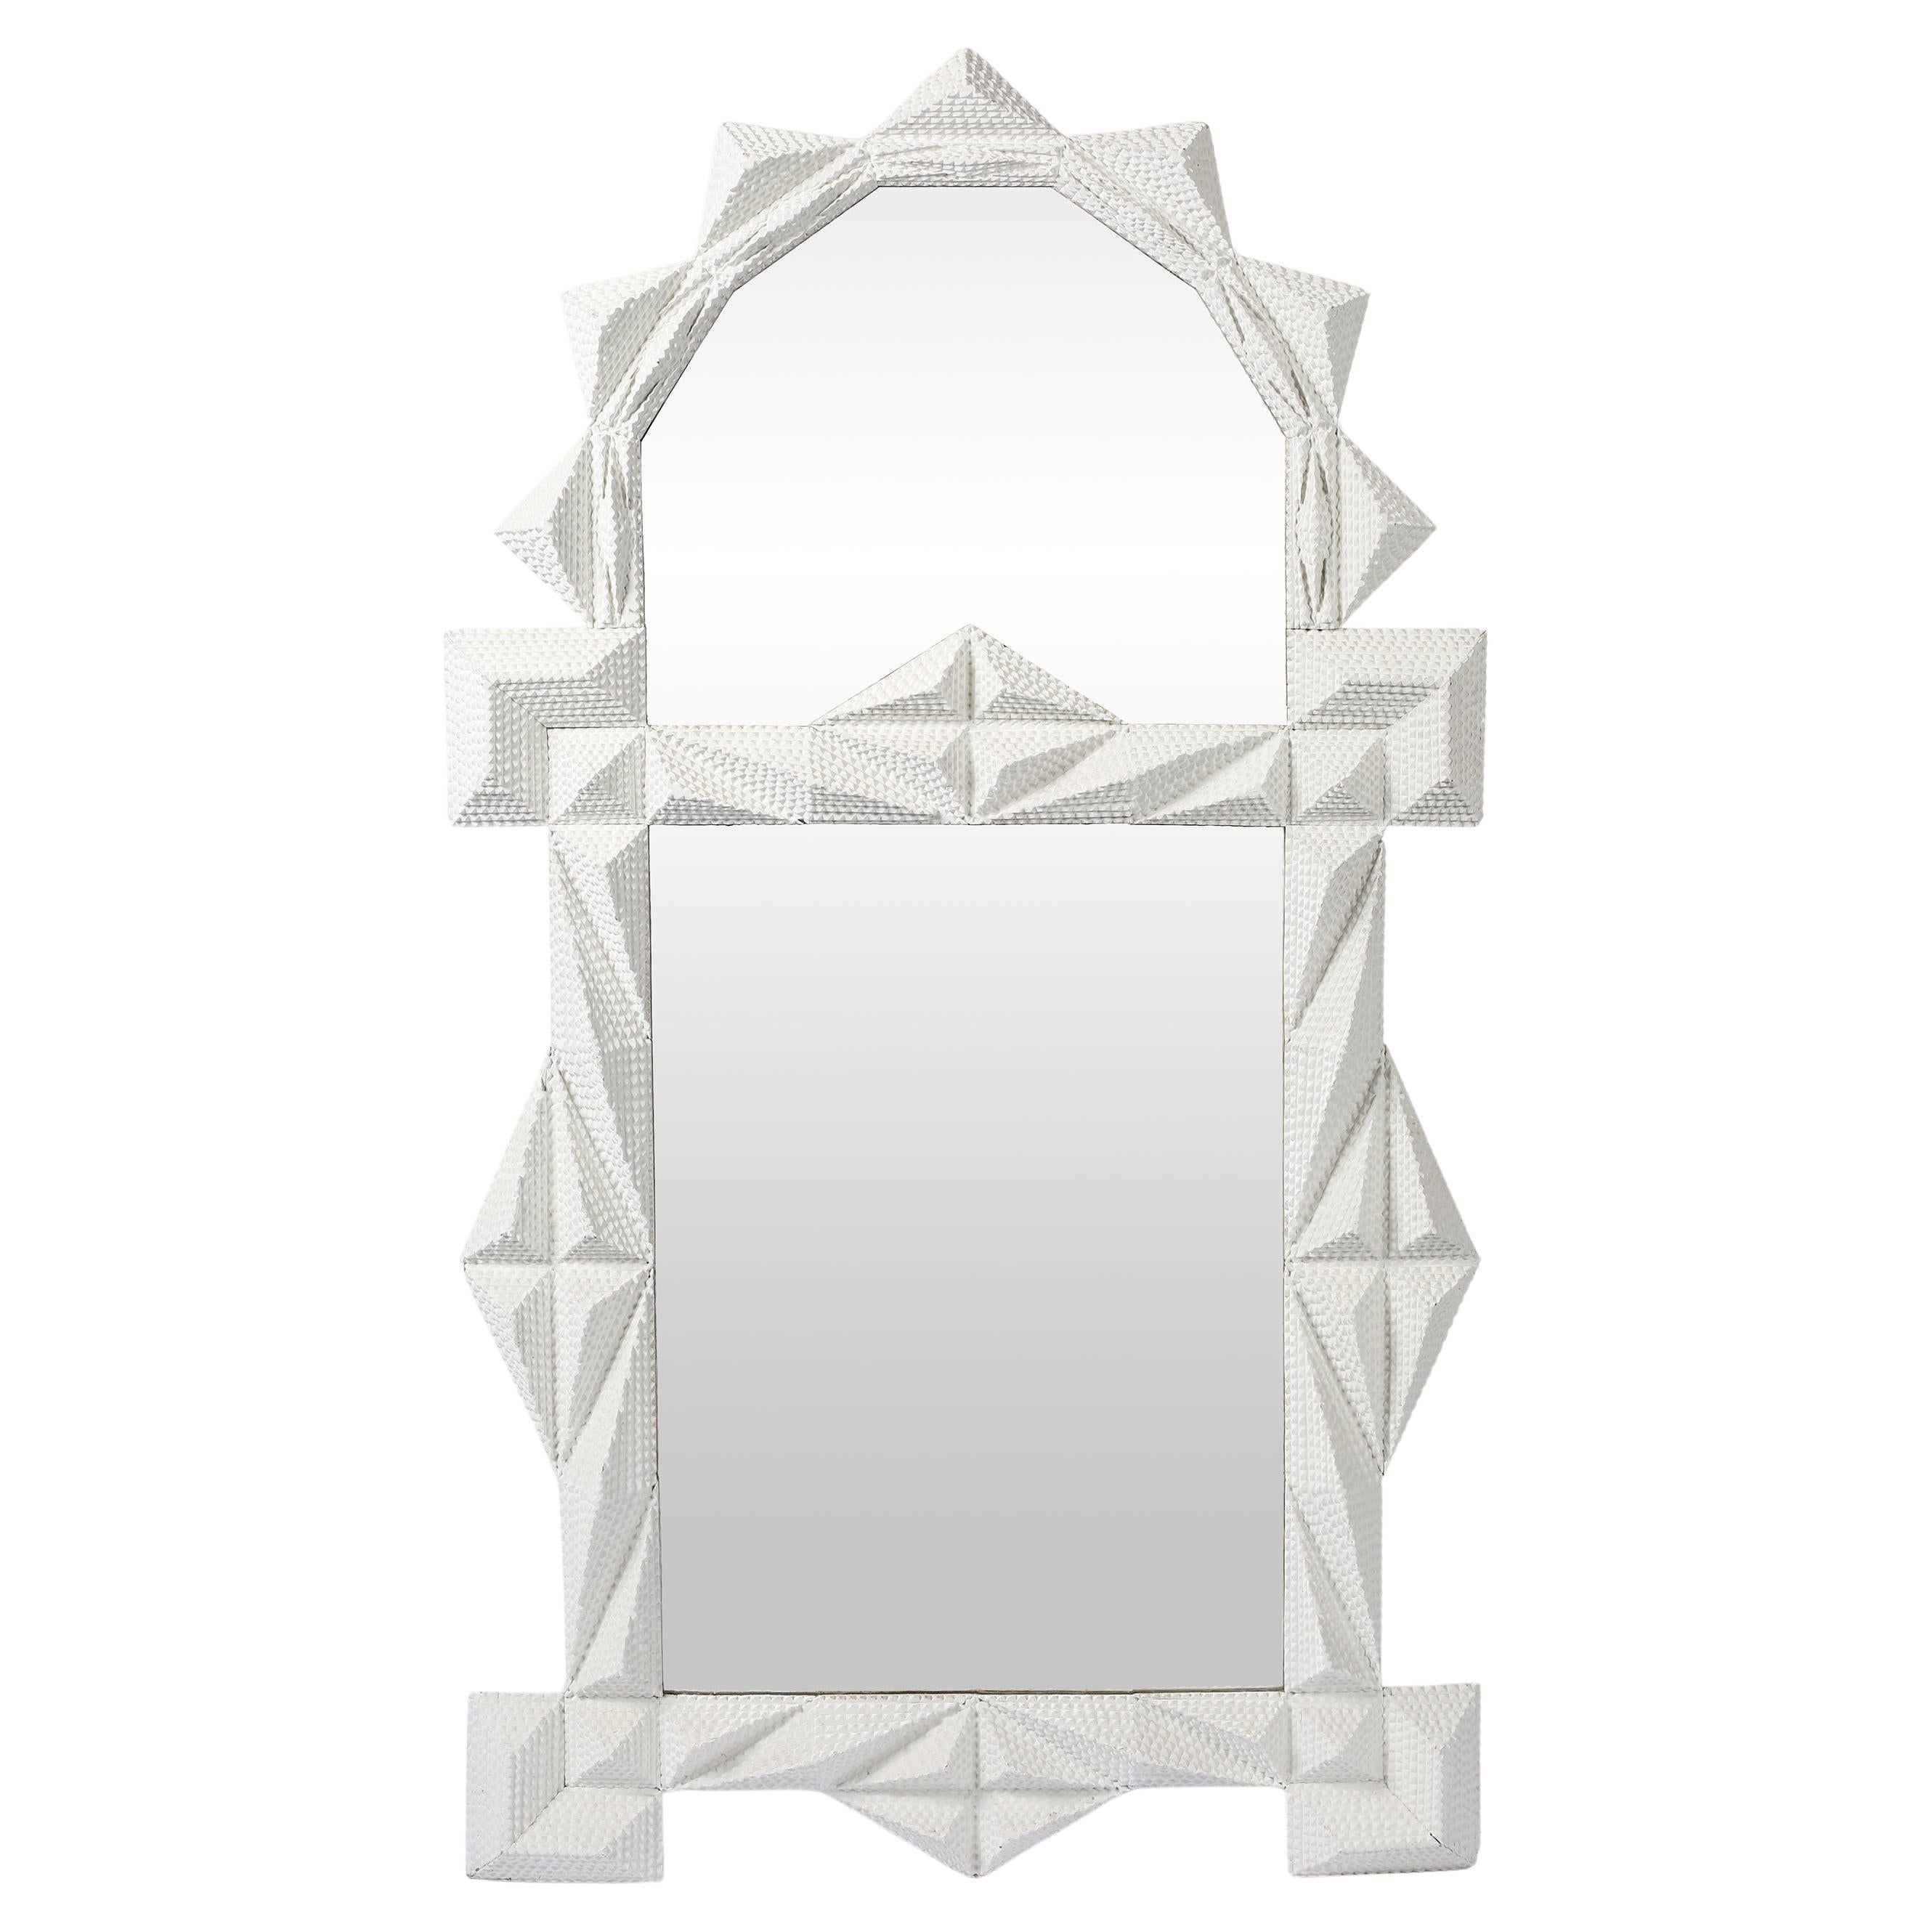 Large Early 20th Century White Geometric Tramp Art Mirror For Sale